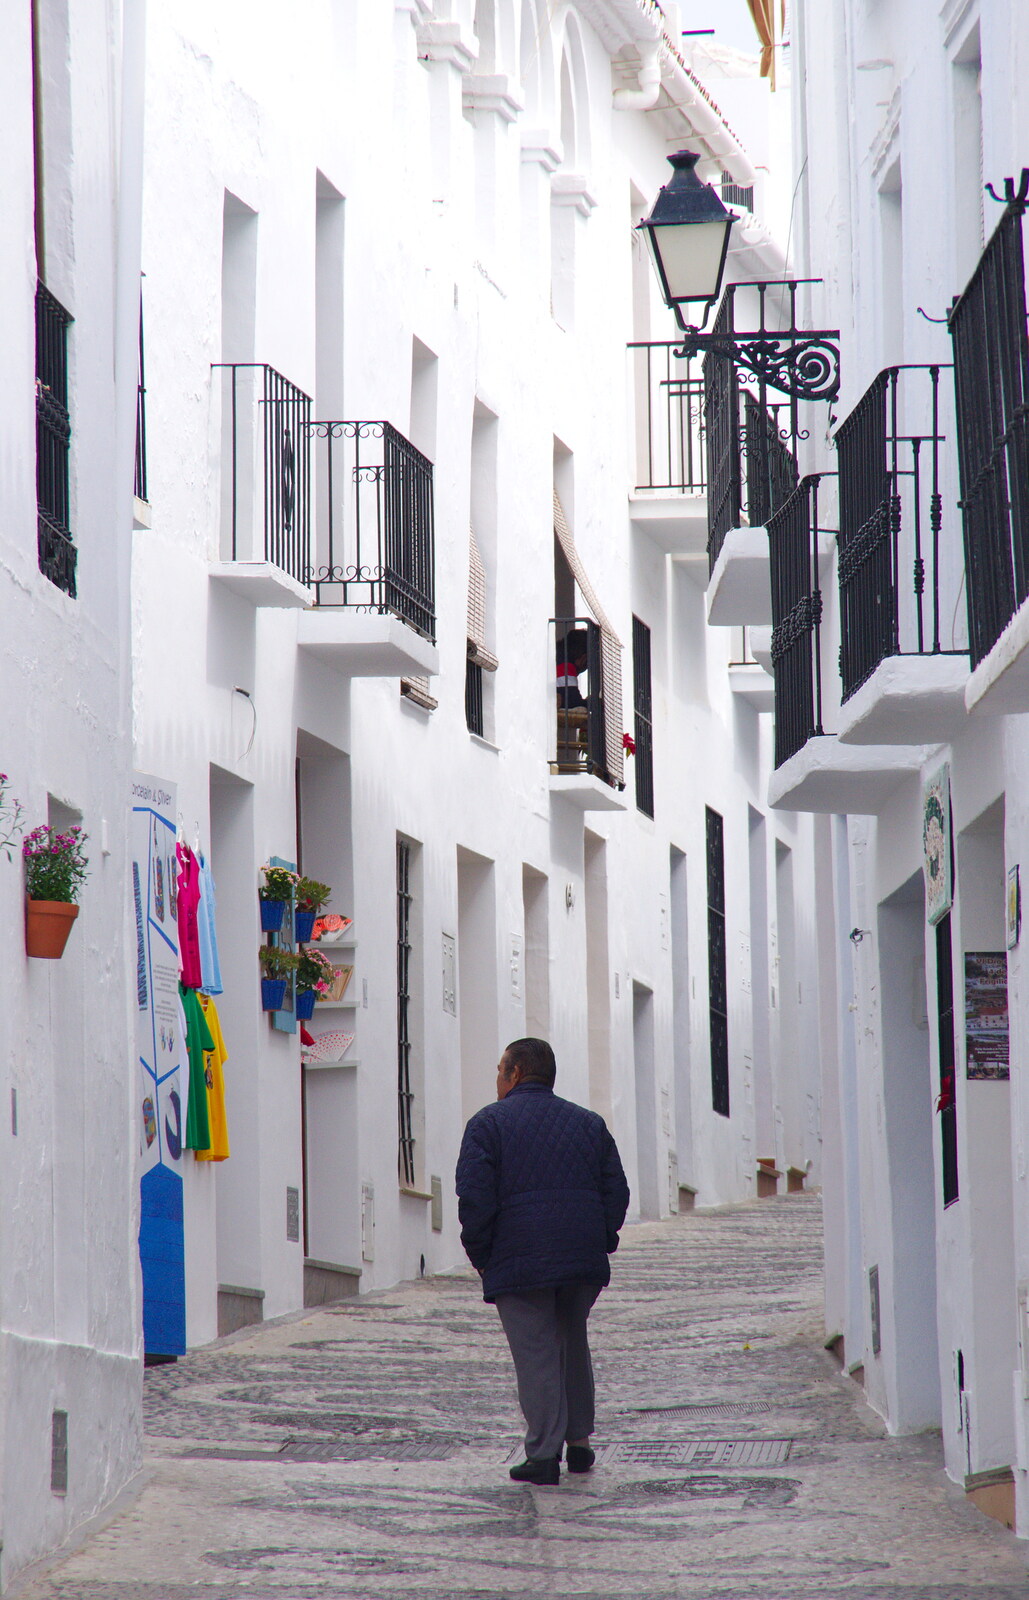 The whitewashed streets of Frigiliana from The Caves of Nerja, and Frigiliana, Andalusia, Spain - 18th April 2019